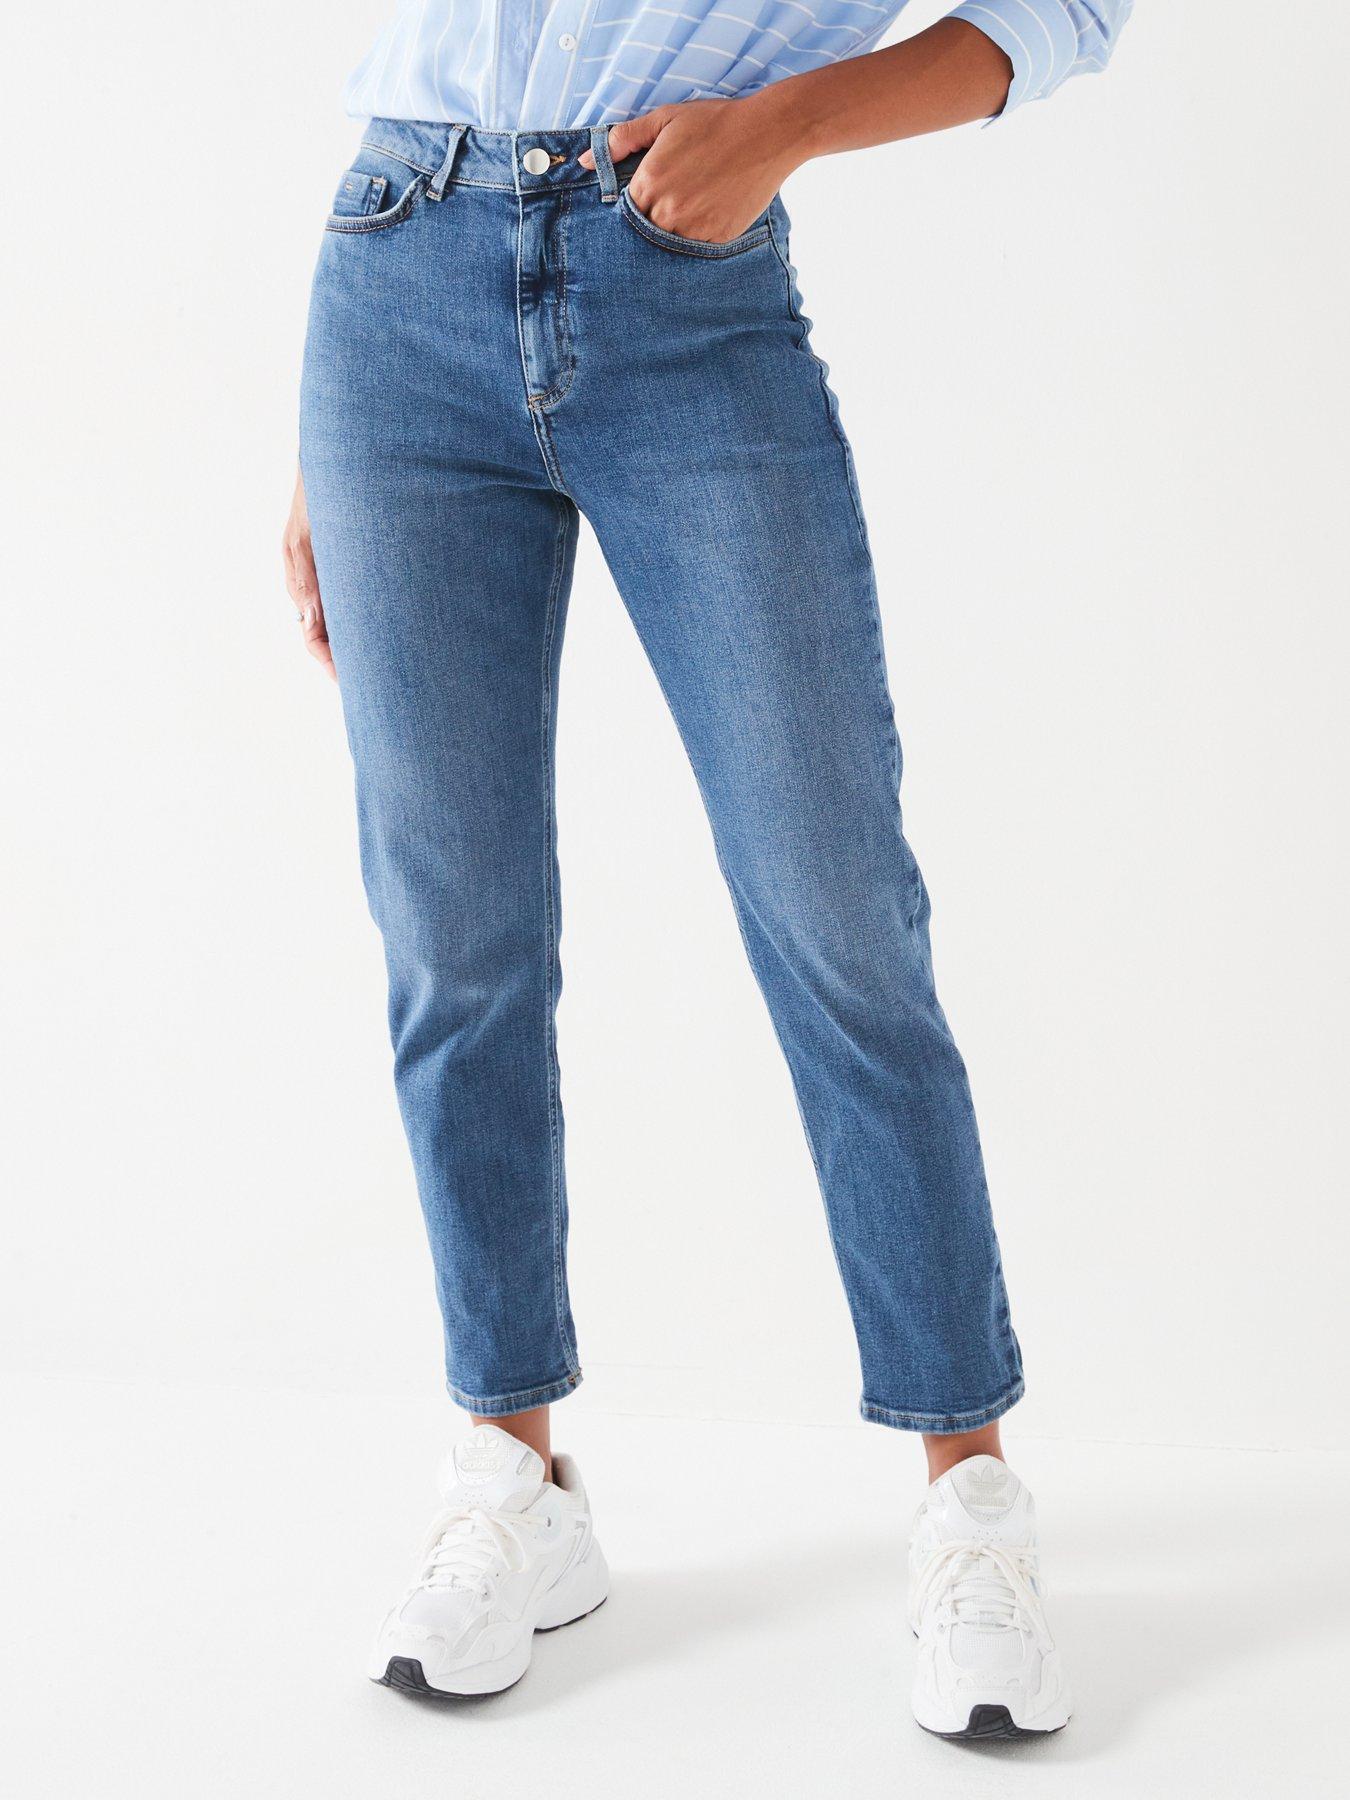 V by very, Jeans, Women